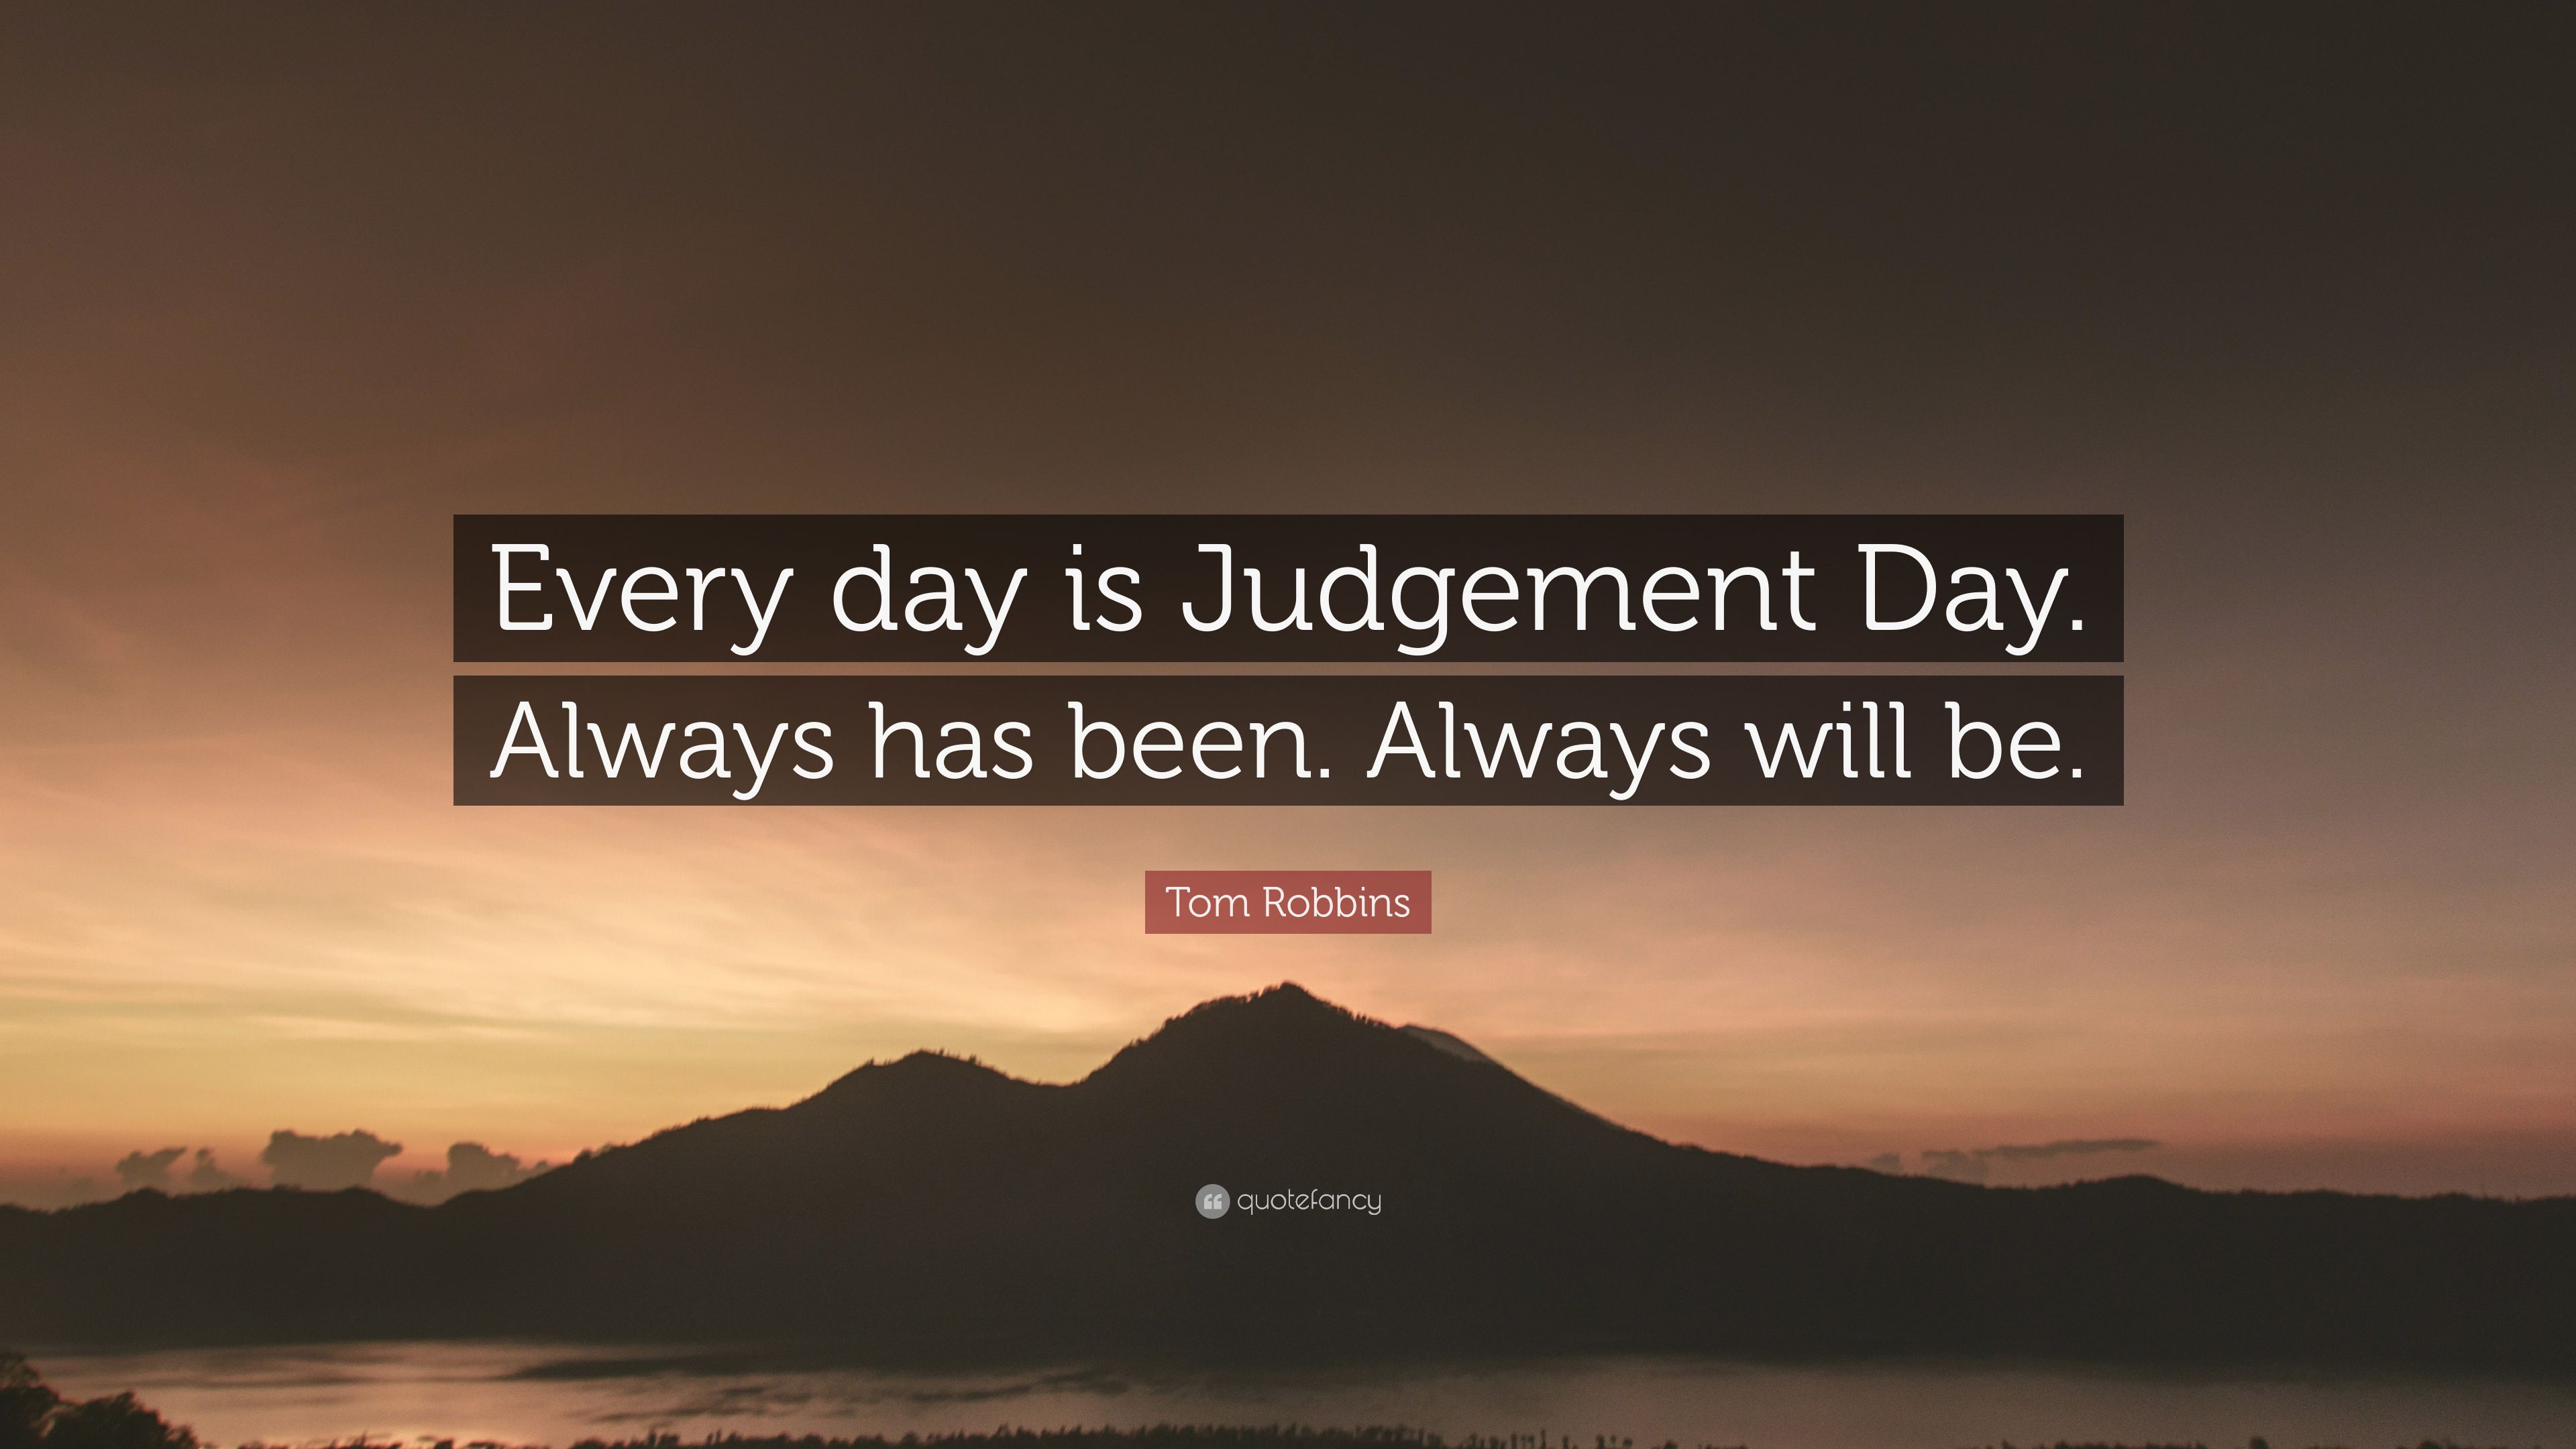 Tom Robbins Quote: “Every day is Judgement Day. Always has been. Always will be.” (7 wallpaper)